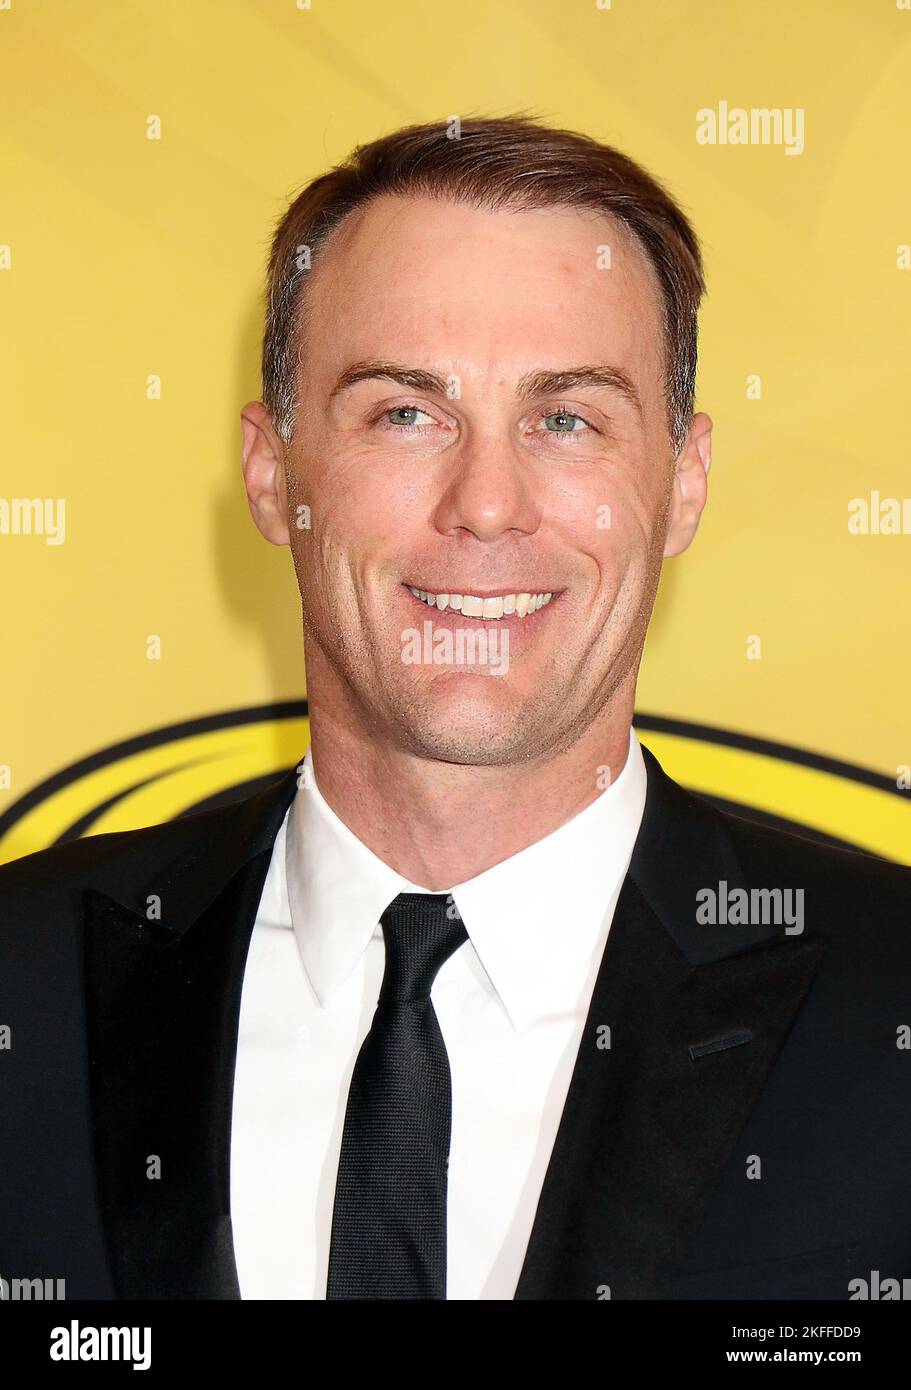 Kevin Harvick attending the 2015 NASCAR Sprint Cup Series Awards at Wynn Hotel & Casino, Las Vegas, December 4th, 2015. Stock Photo